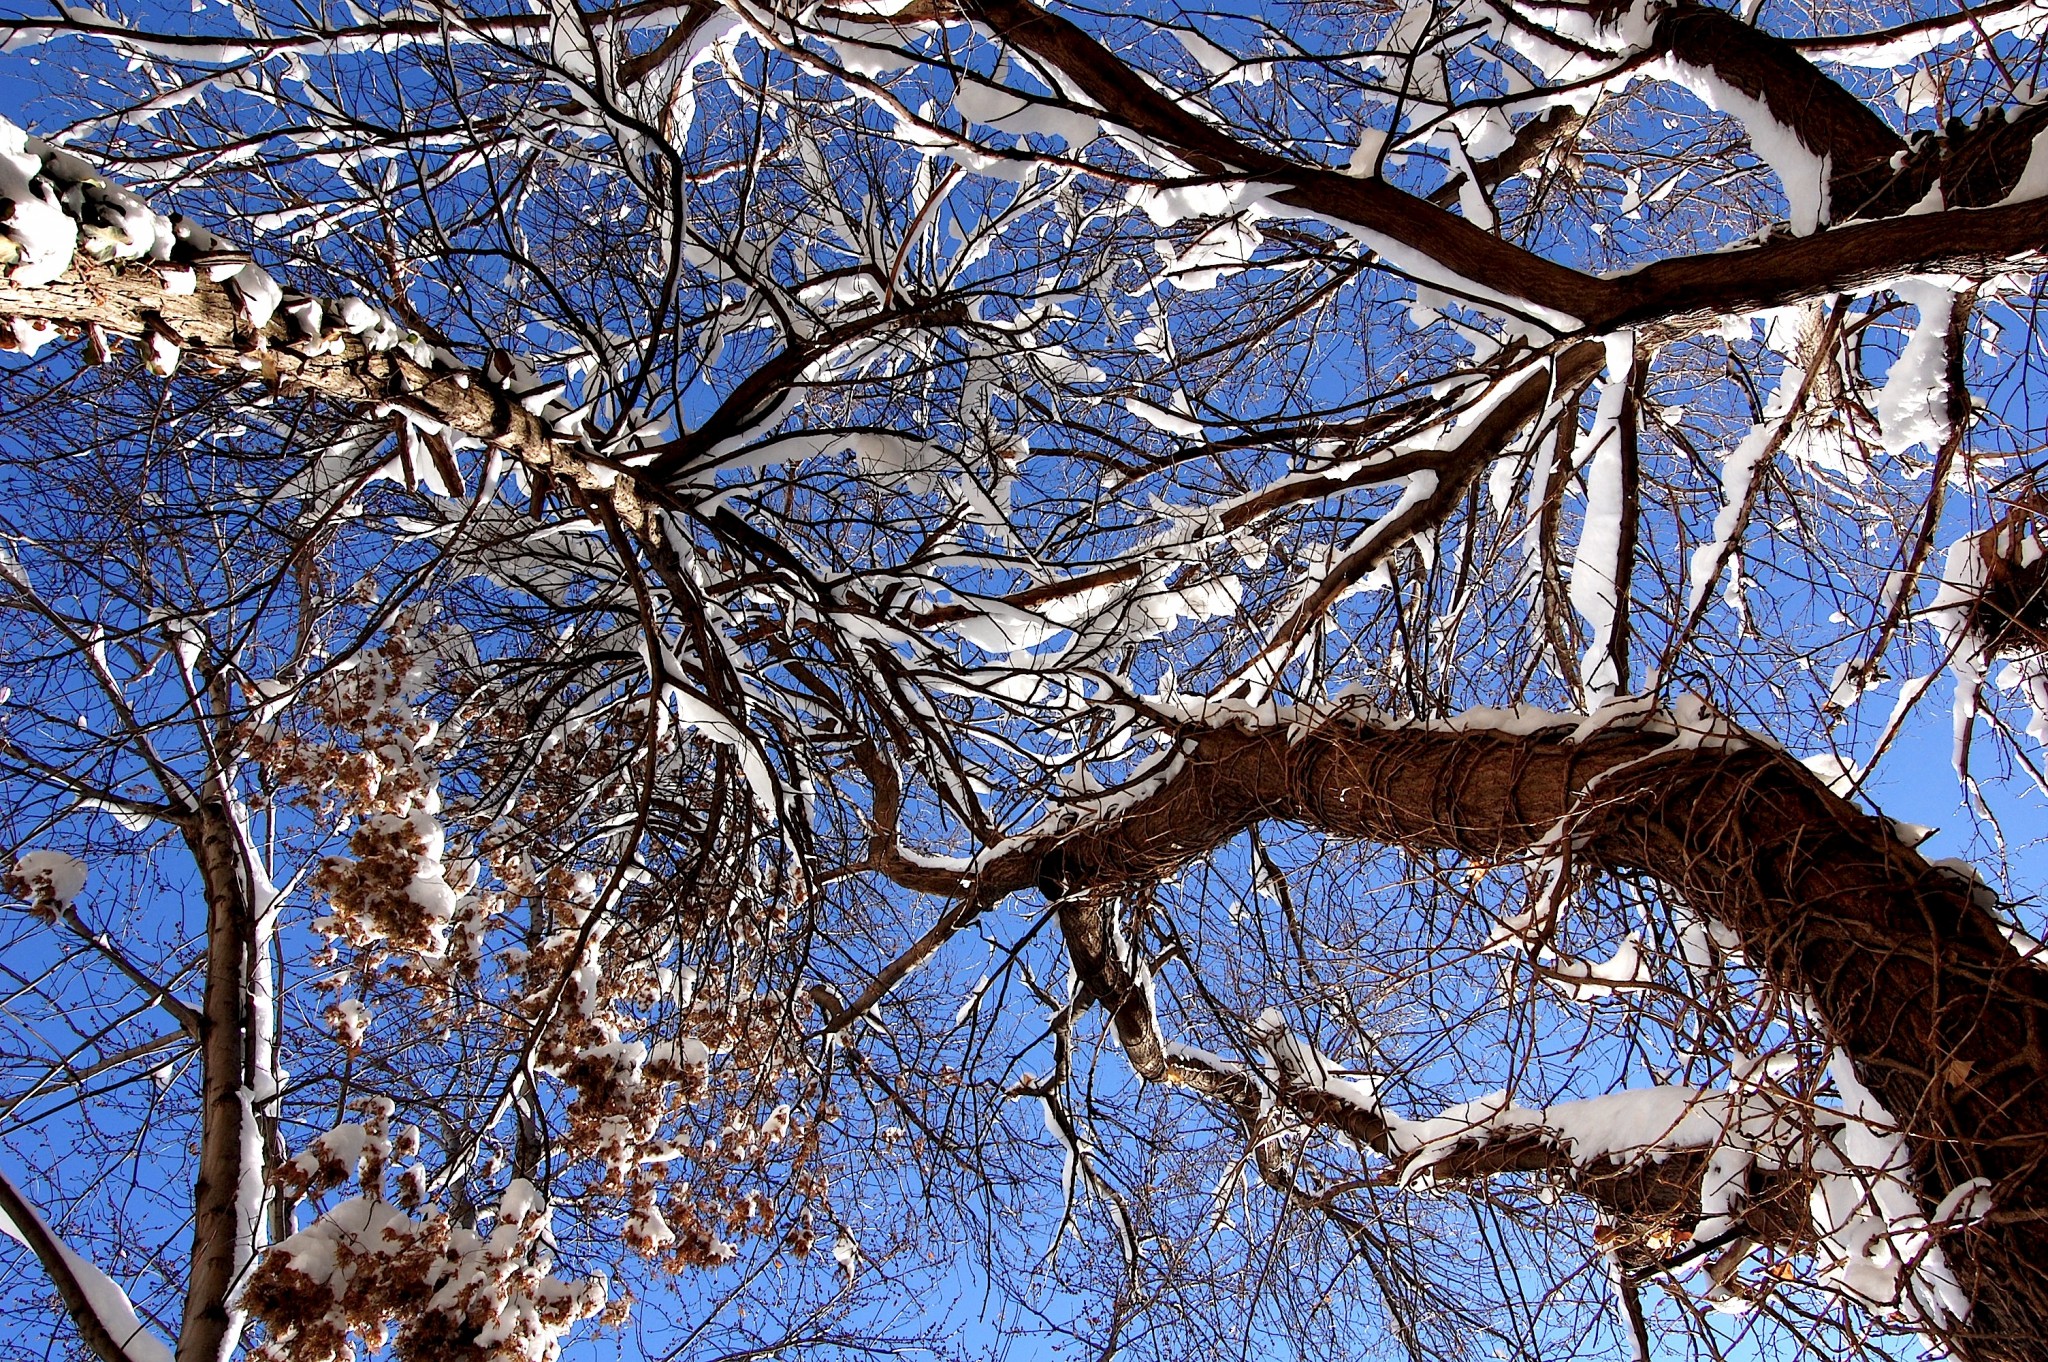 looking up at a clear blue sky with various tree smattered with snow